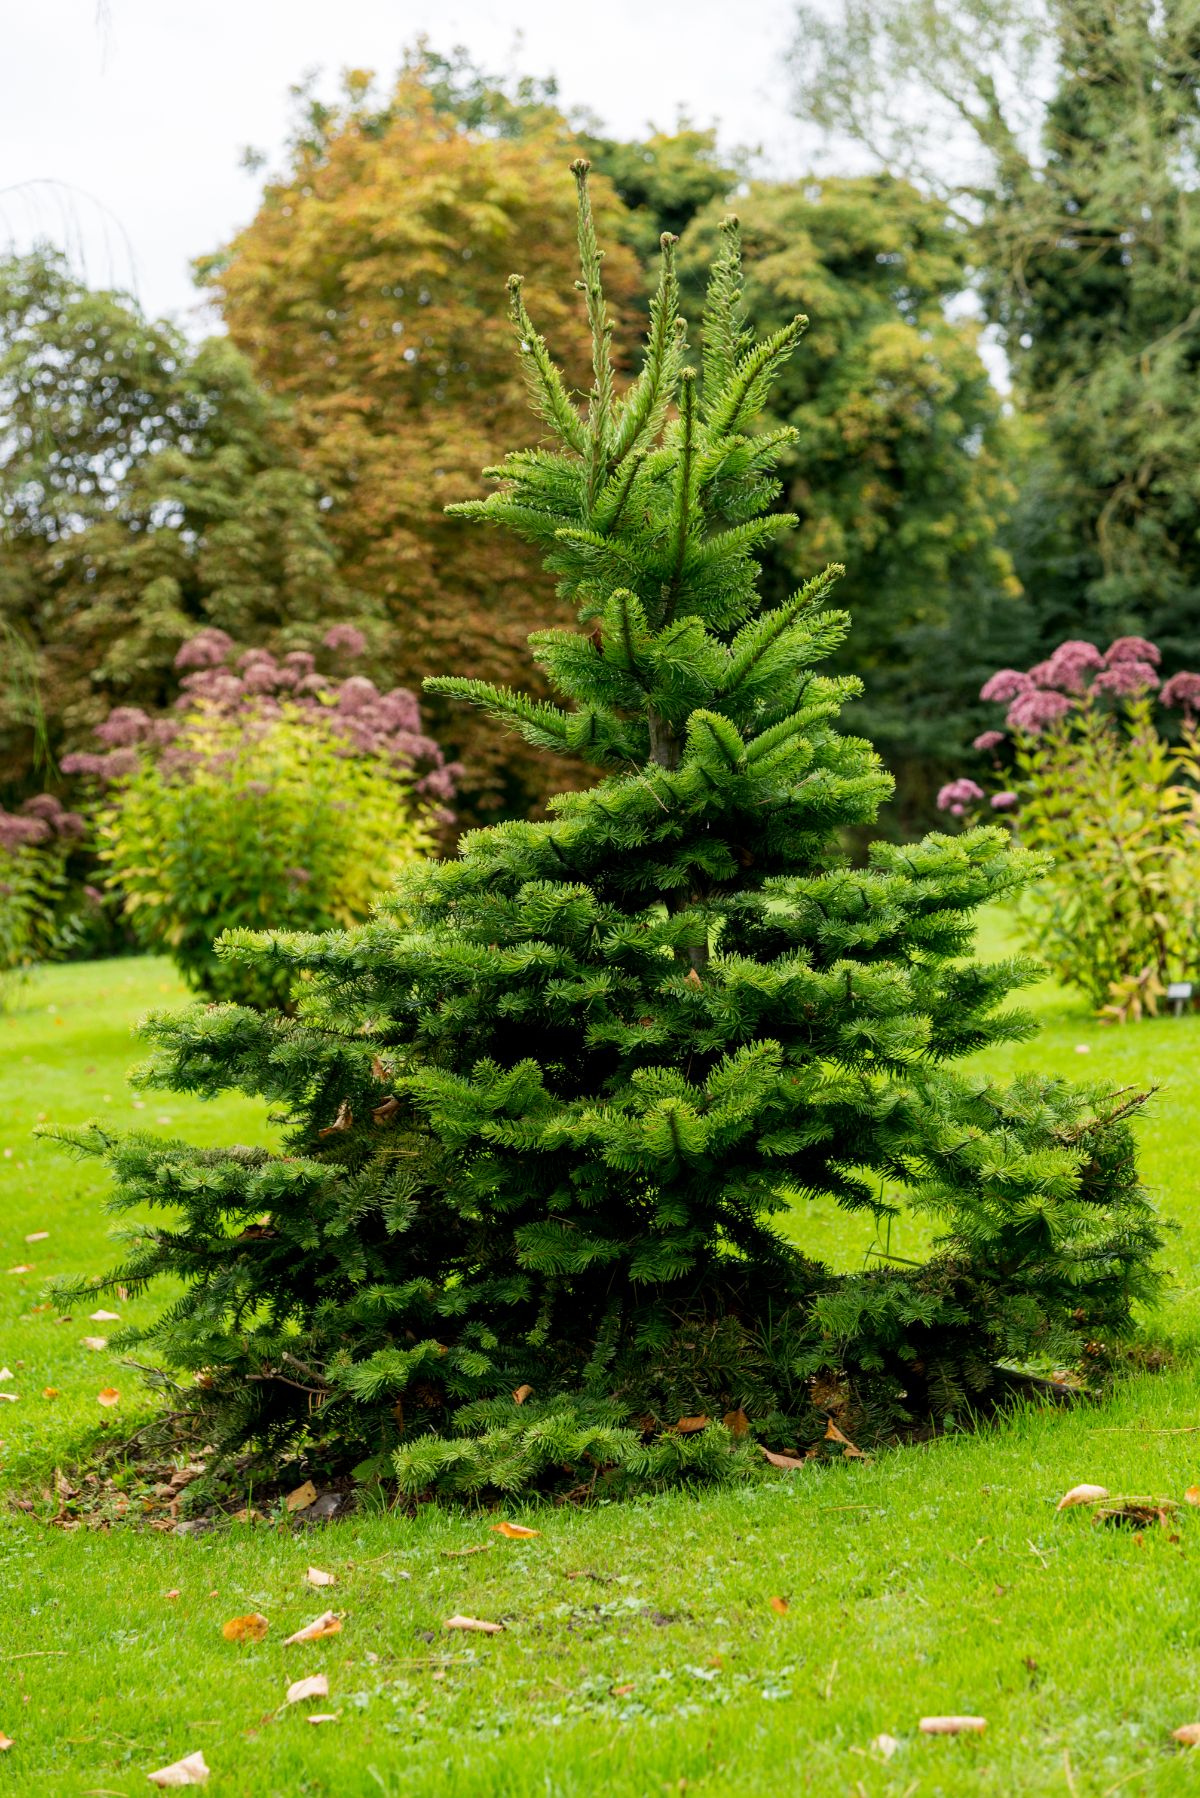 Norway Spruce 'Pusch' planted in a yard